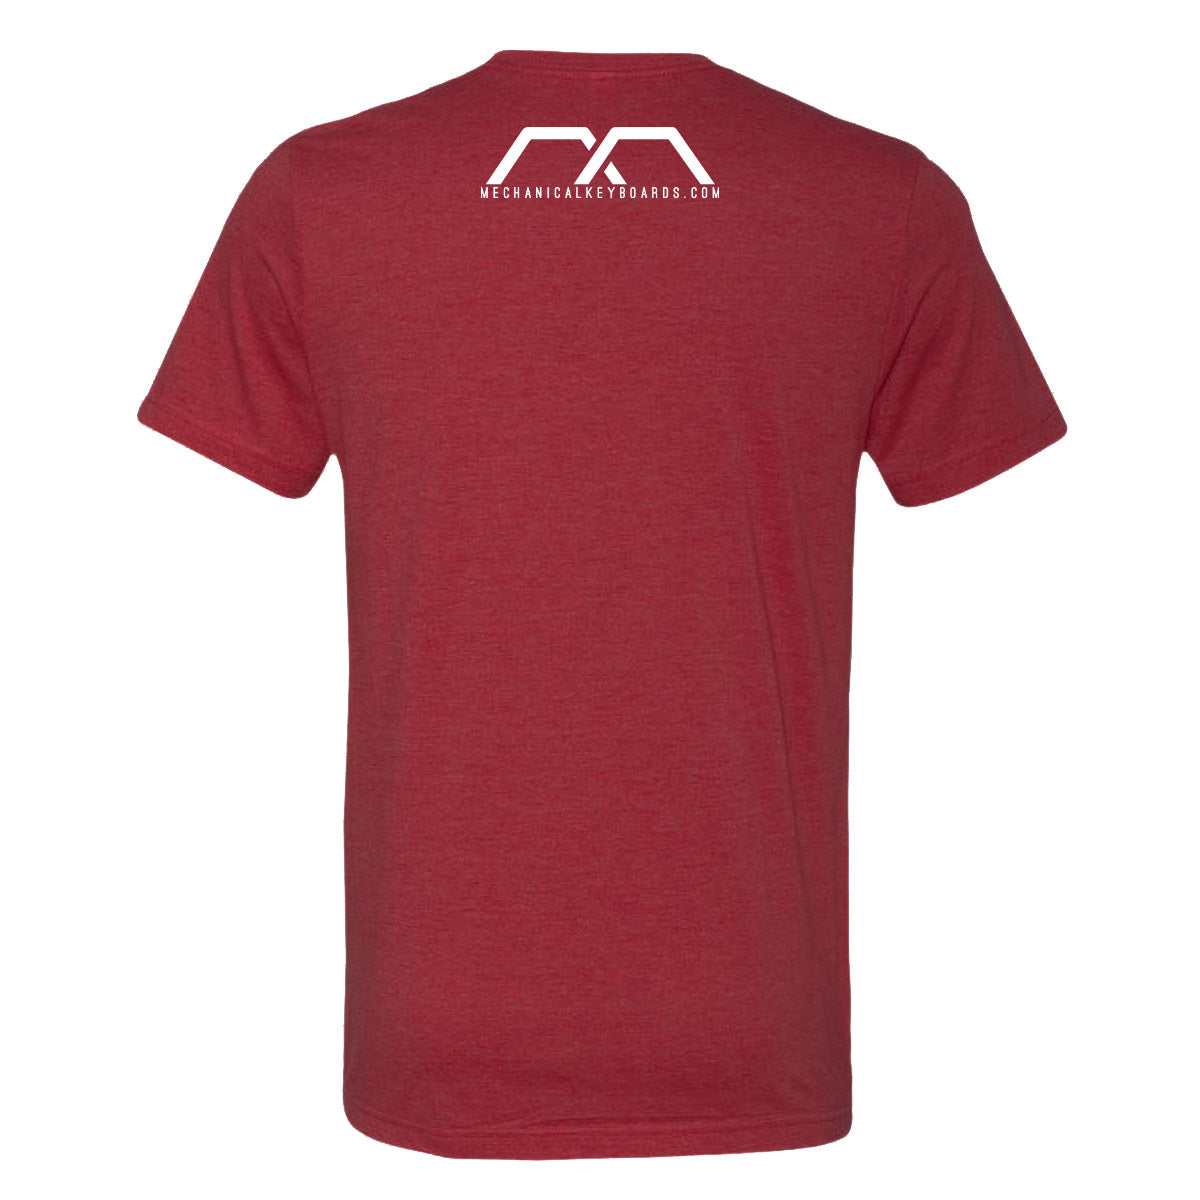 MK What do you type on? Red T-Shirt MK5YVJC6WF |34653|